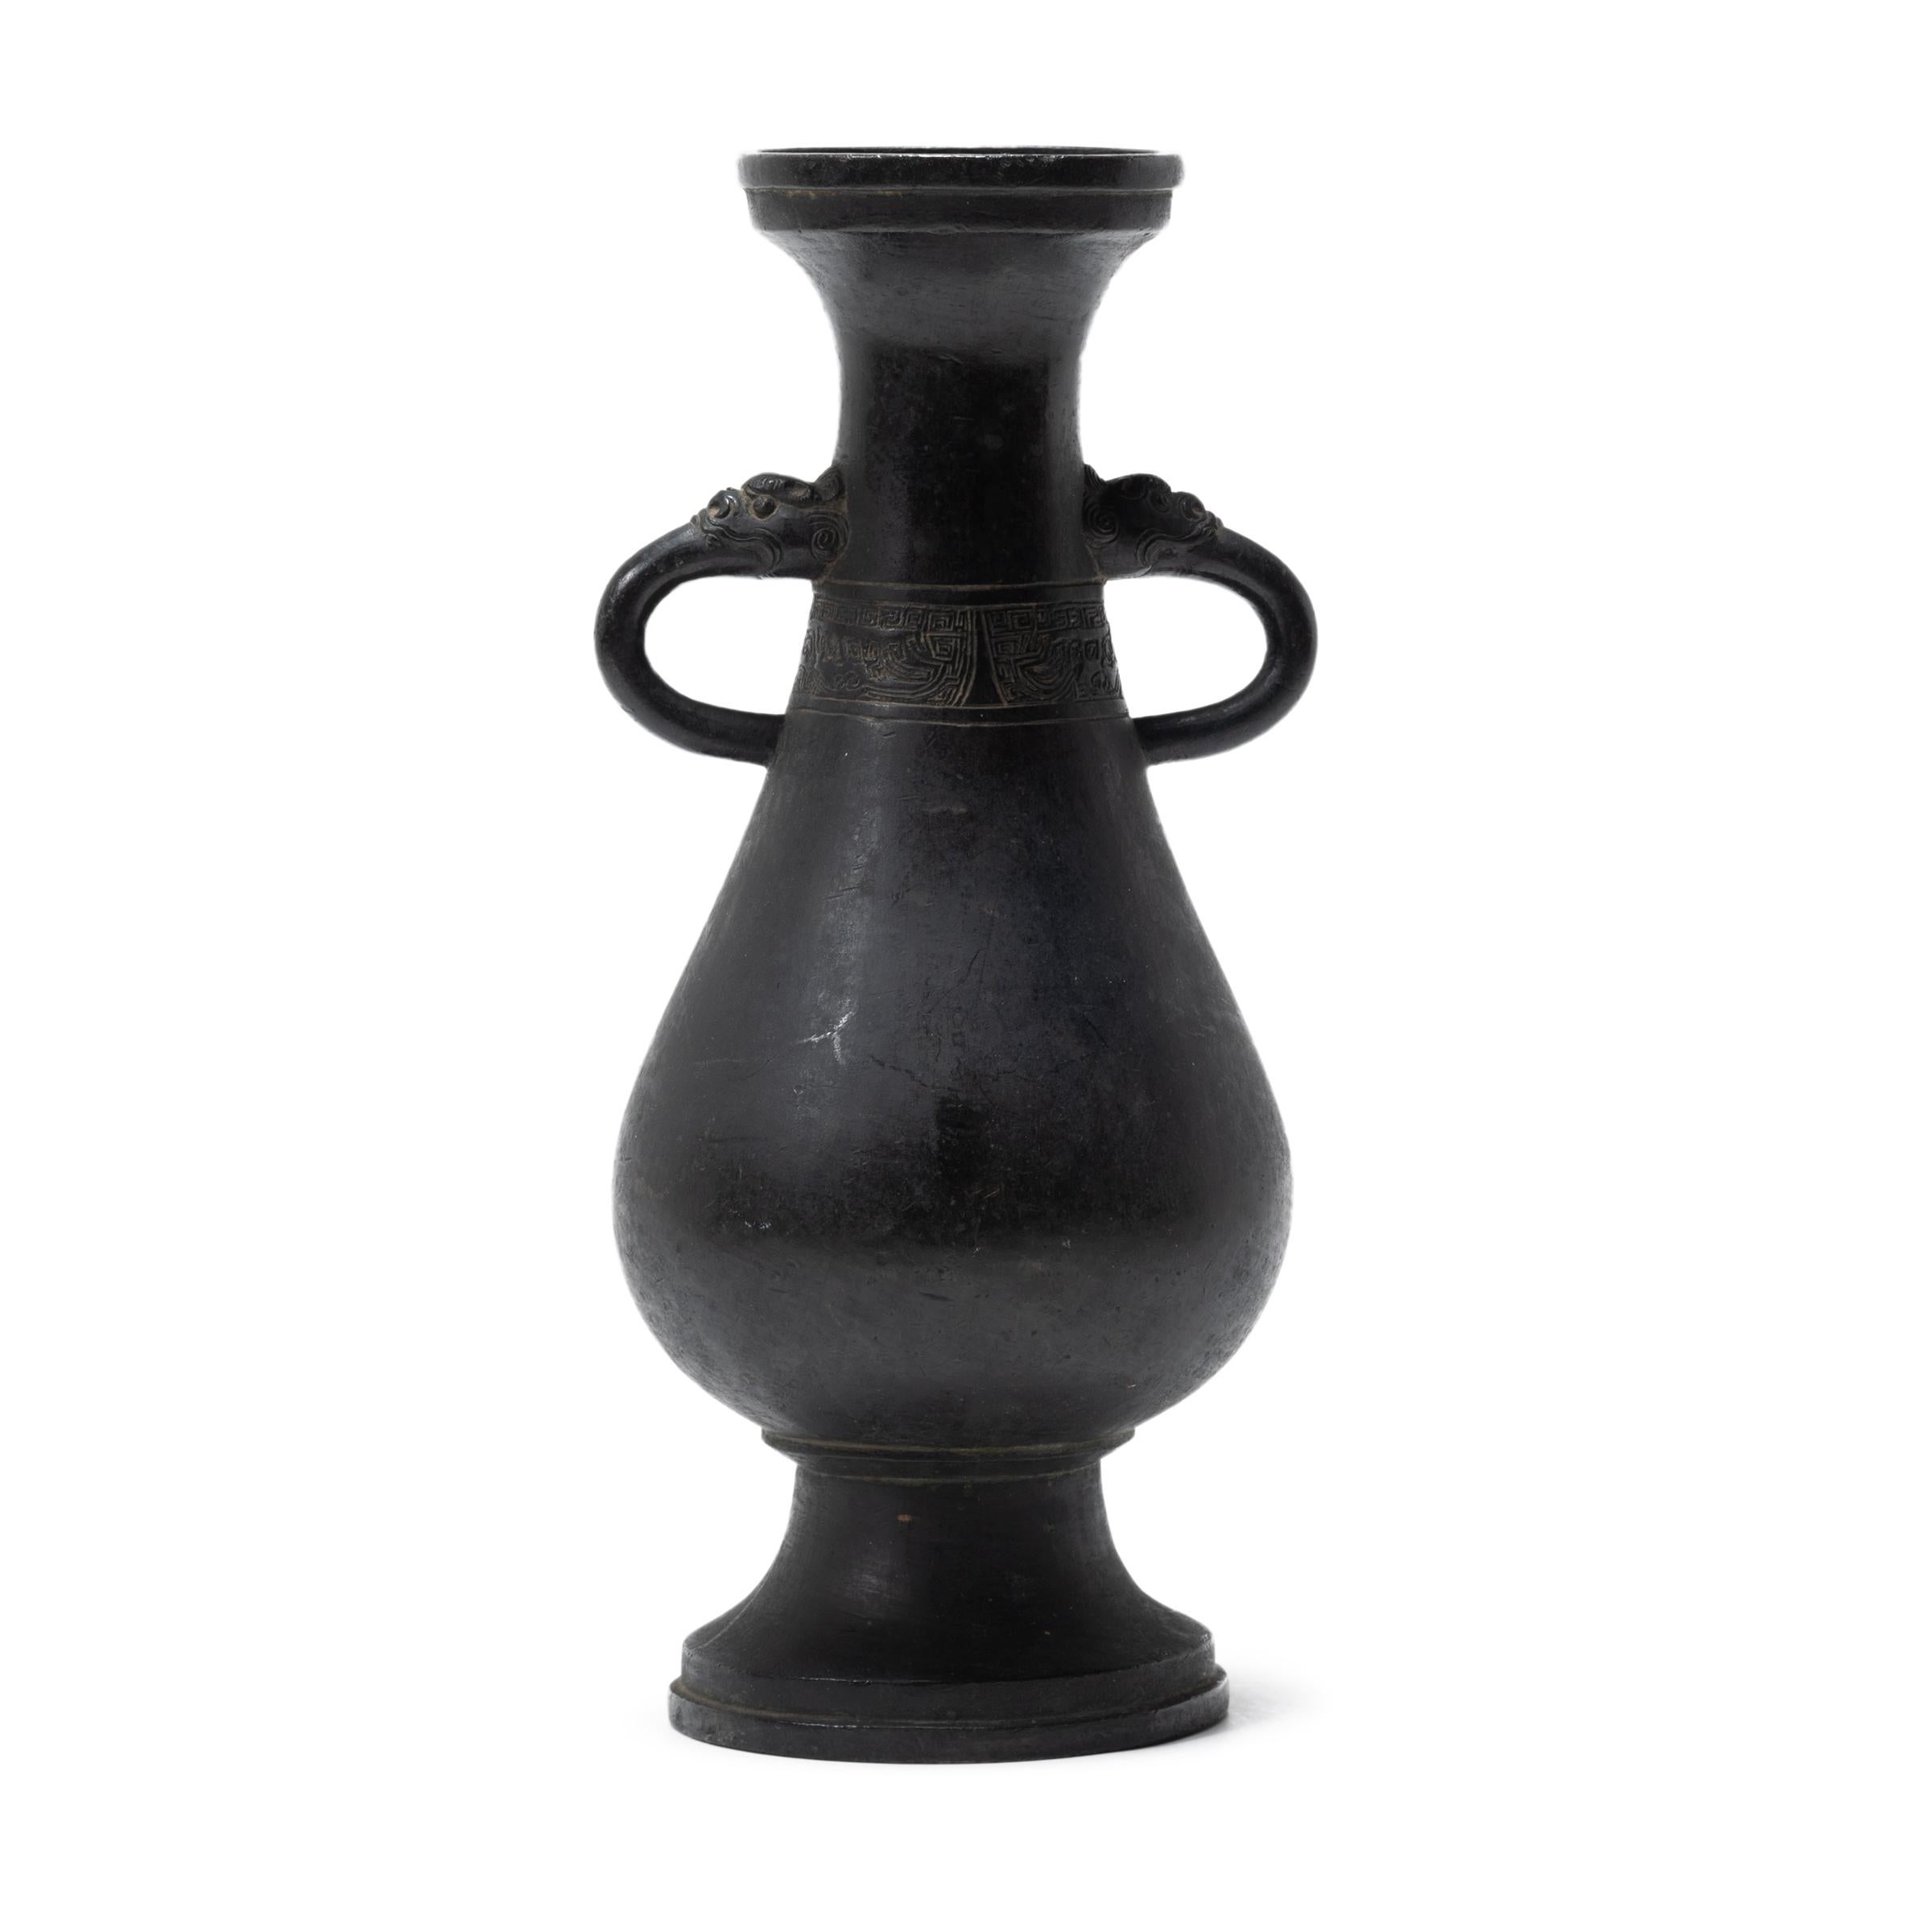 Cast Chinese Ming Bronze Vase with Dragon Lobed Handles